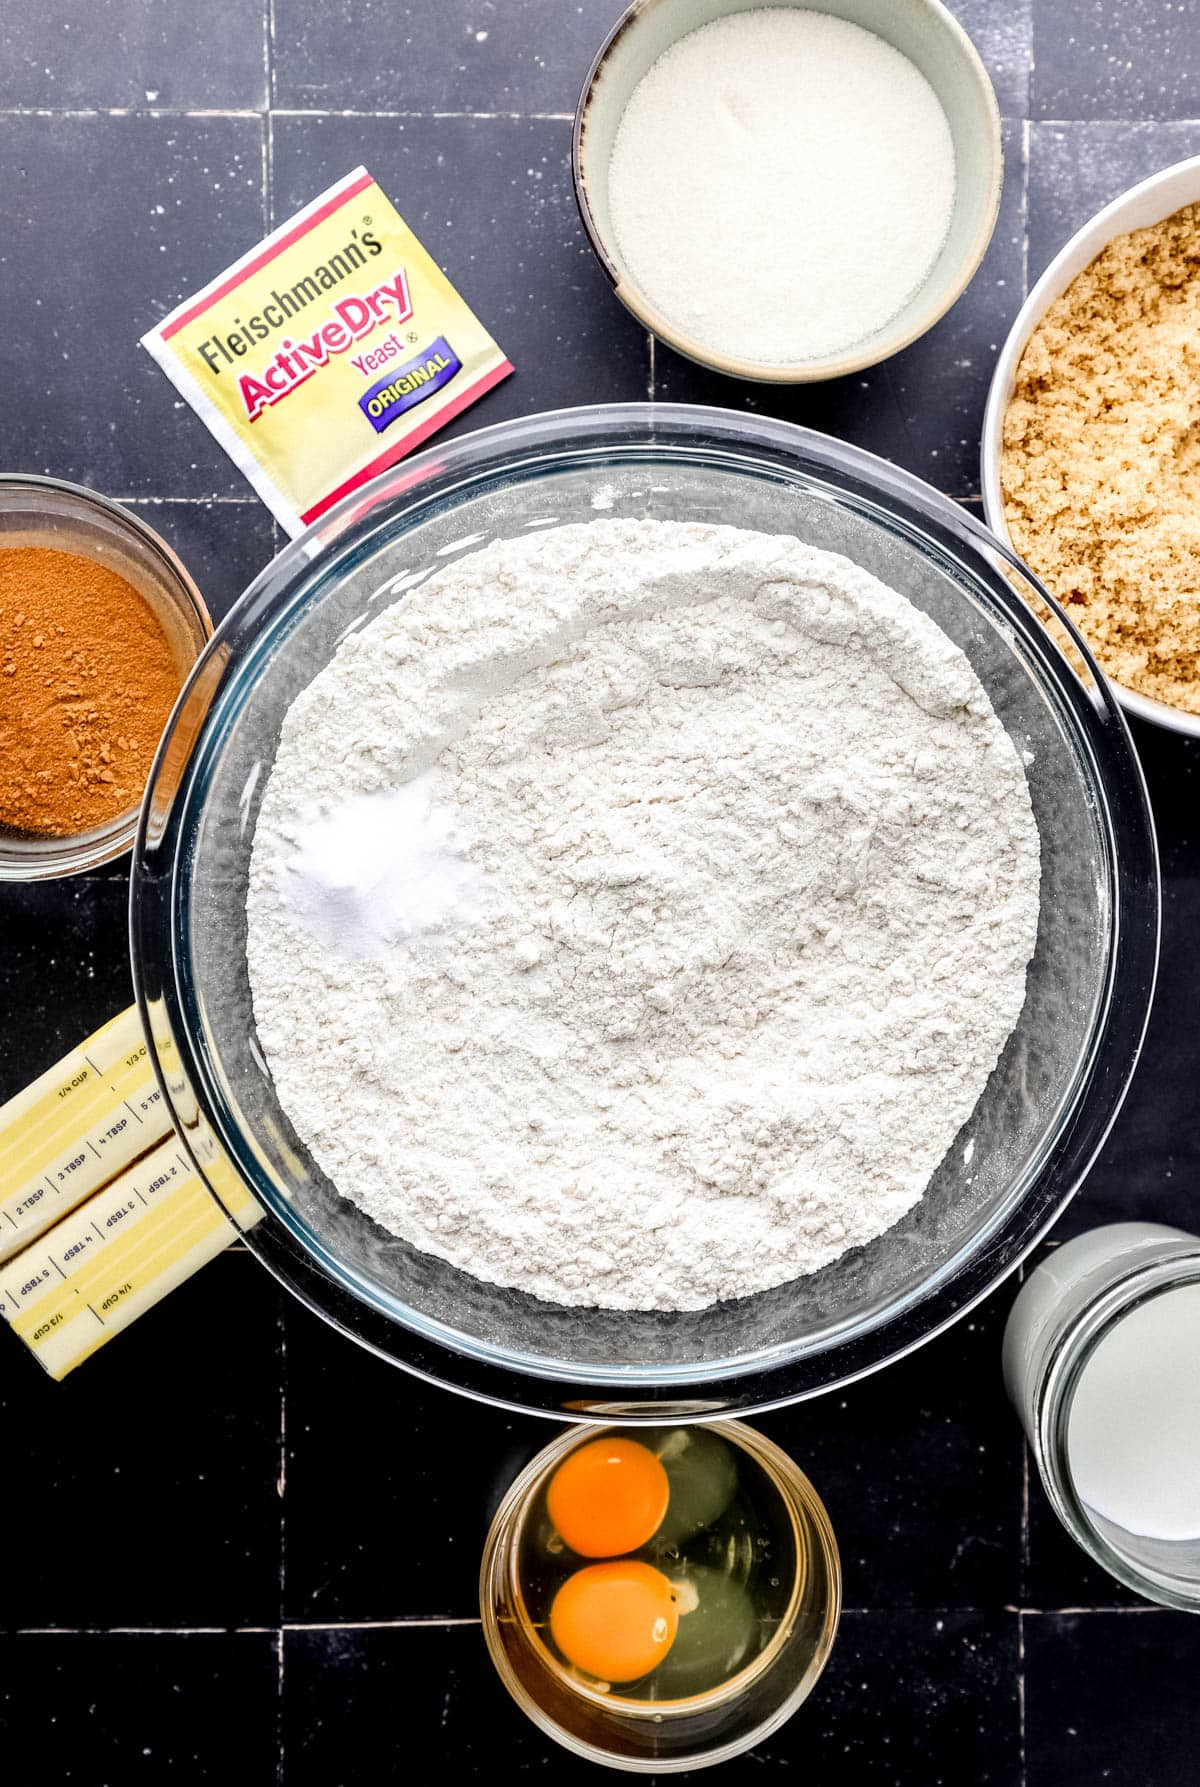 Overhead view of ingredients needed to make cinnamon rolls in separate bowls and containers on black tile surface. 